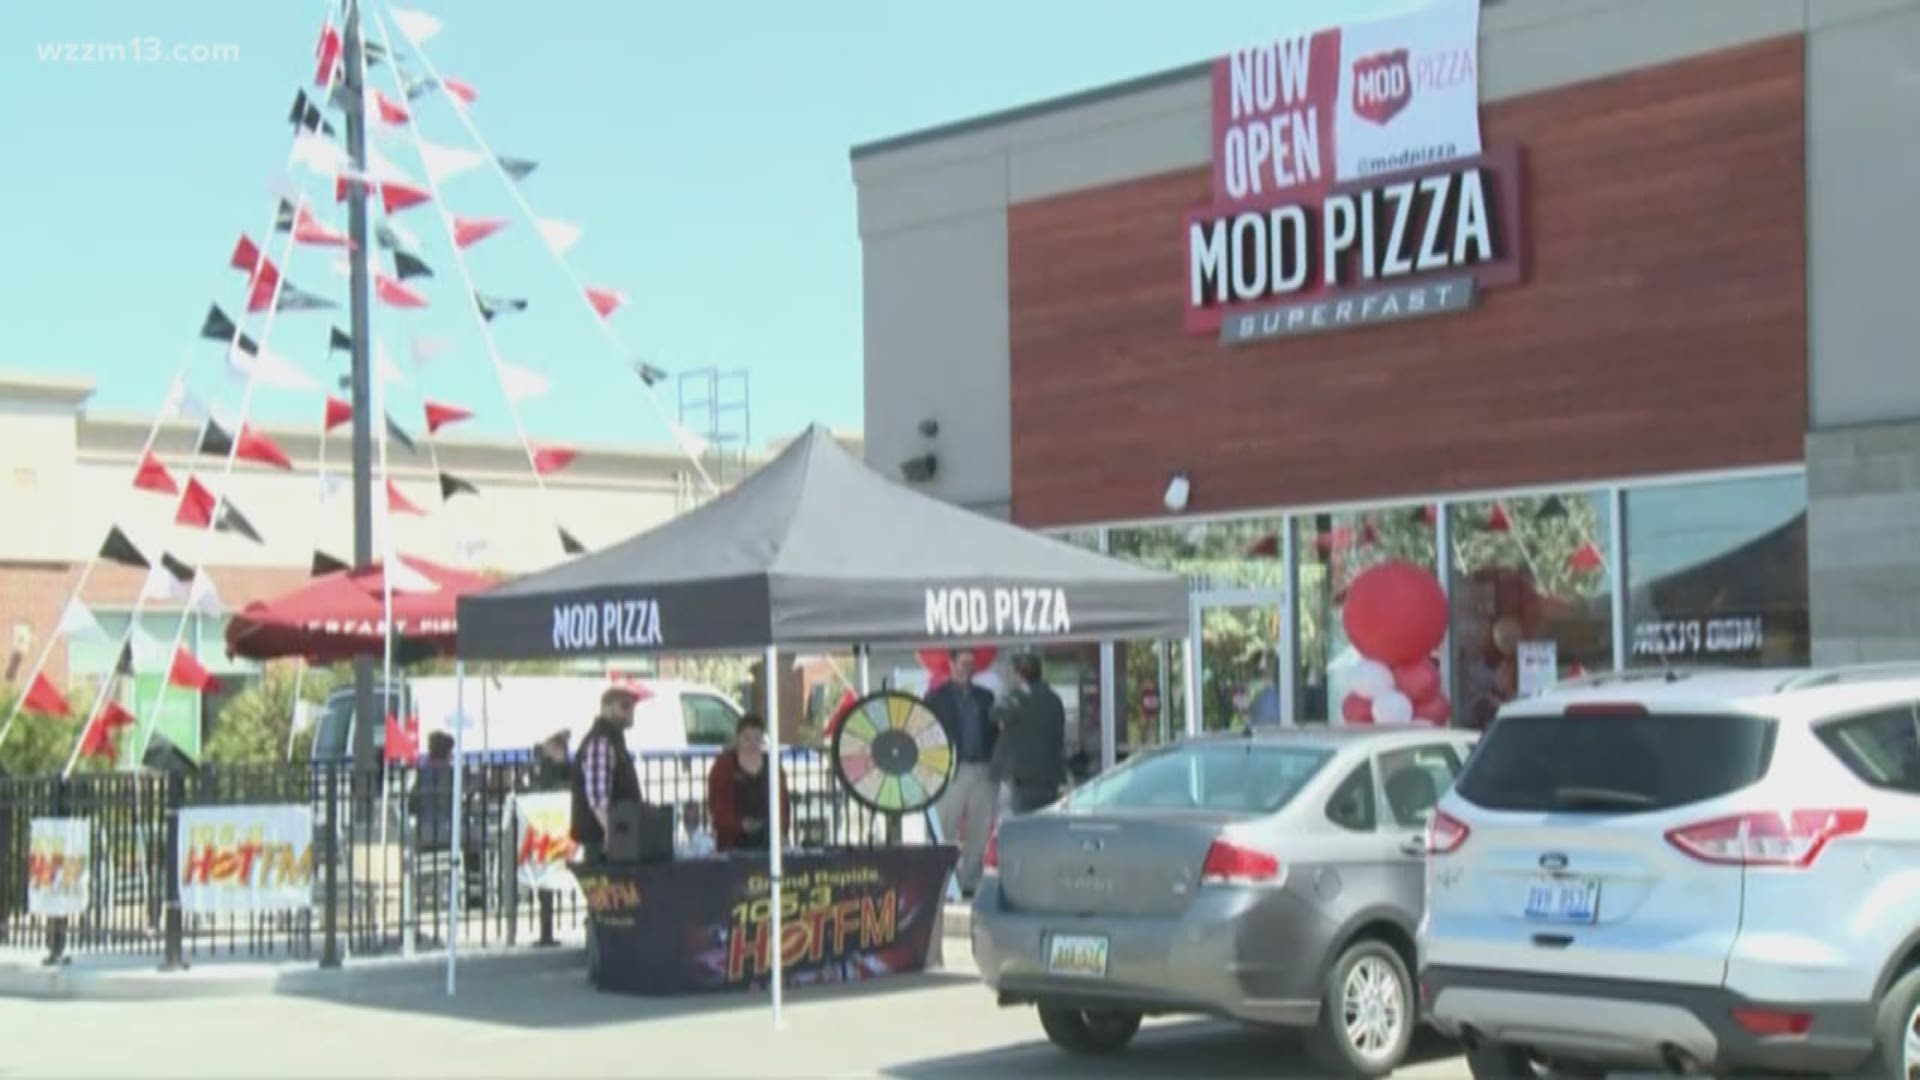 MOD Pizza serving up slices and donating to charity